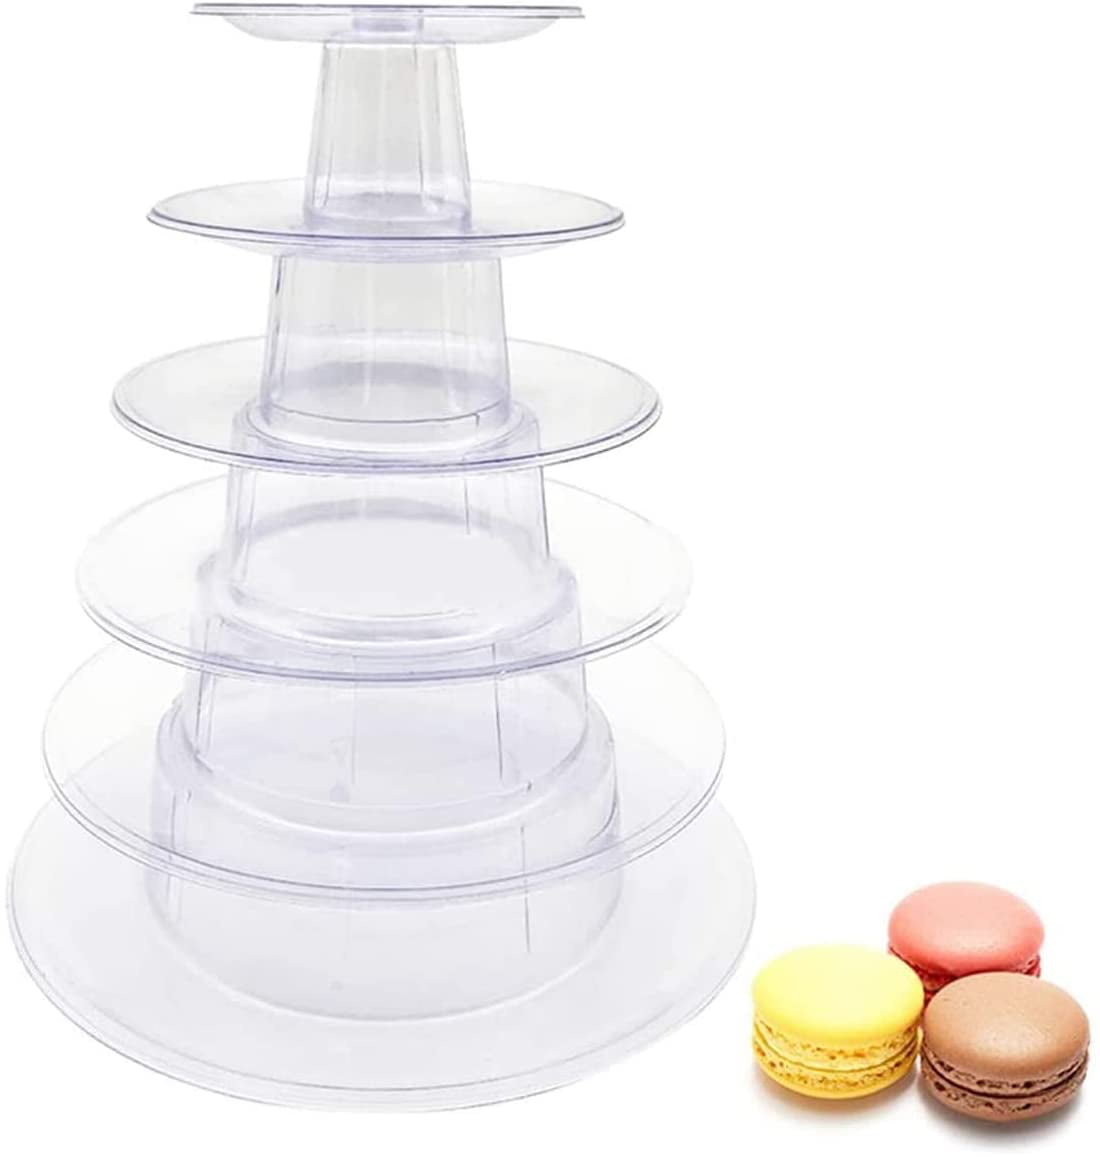 Set 1 Round Macaron Tower Stand 6 Tiers Cupcake Holder Stand Cake Display Rack Adjustable Tiers for Wedding Birthday Party Decor 